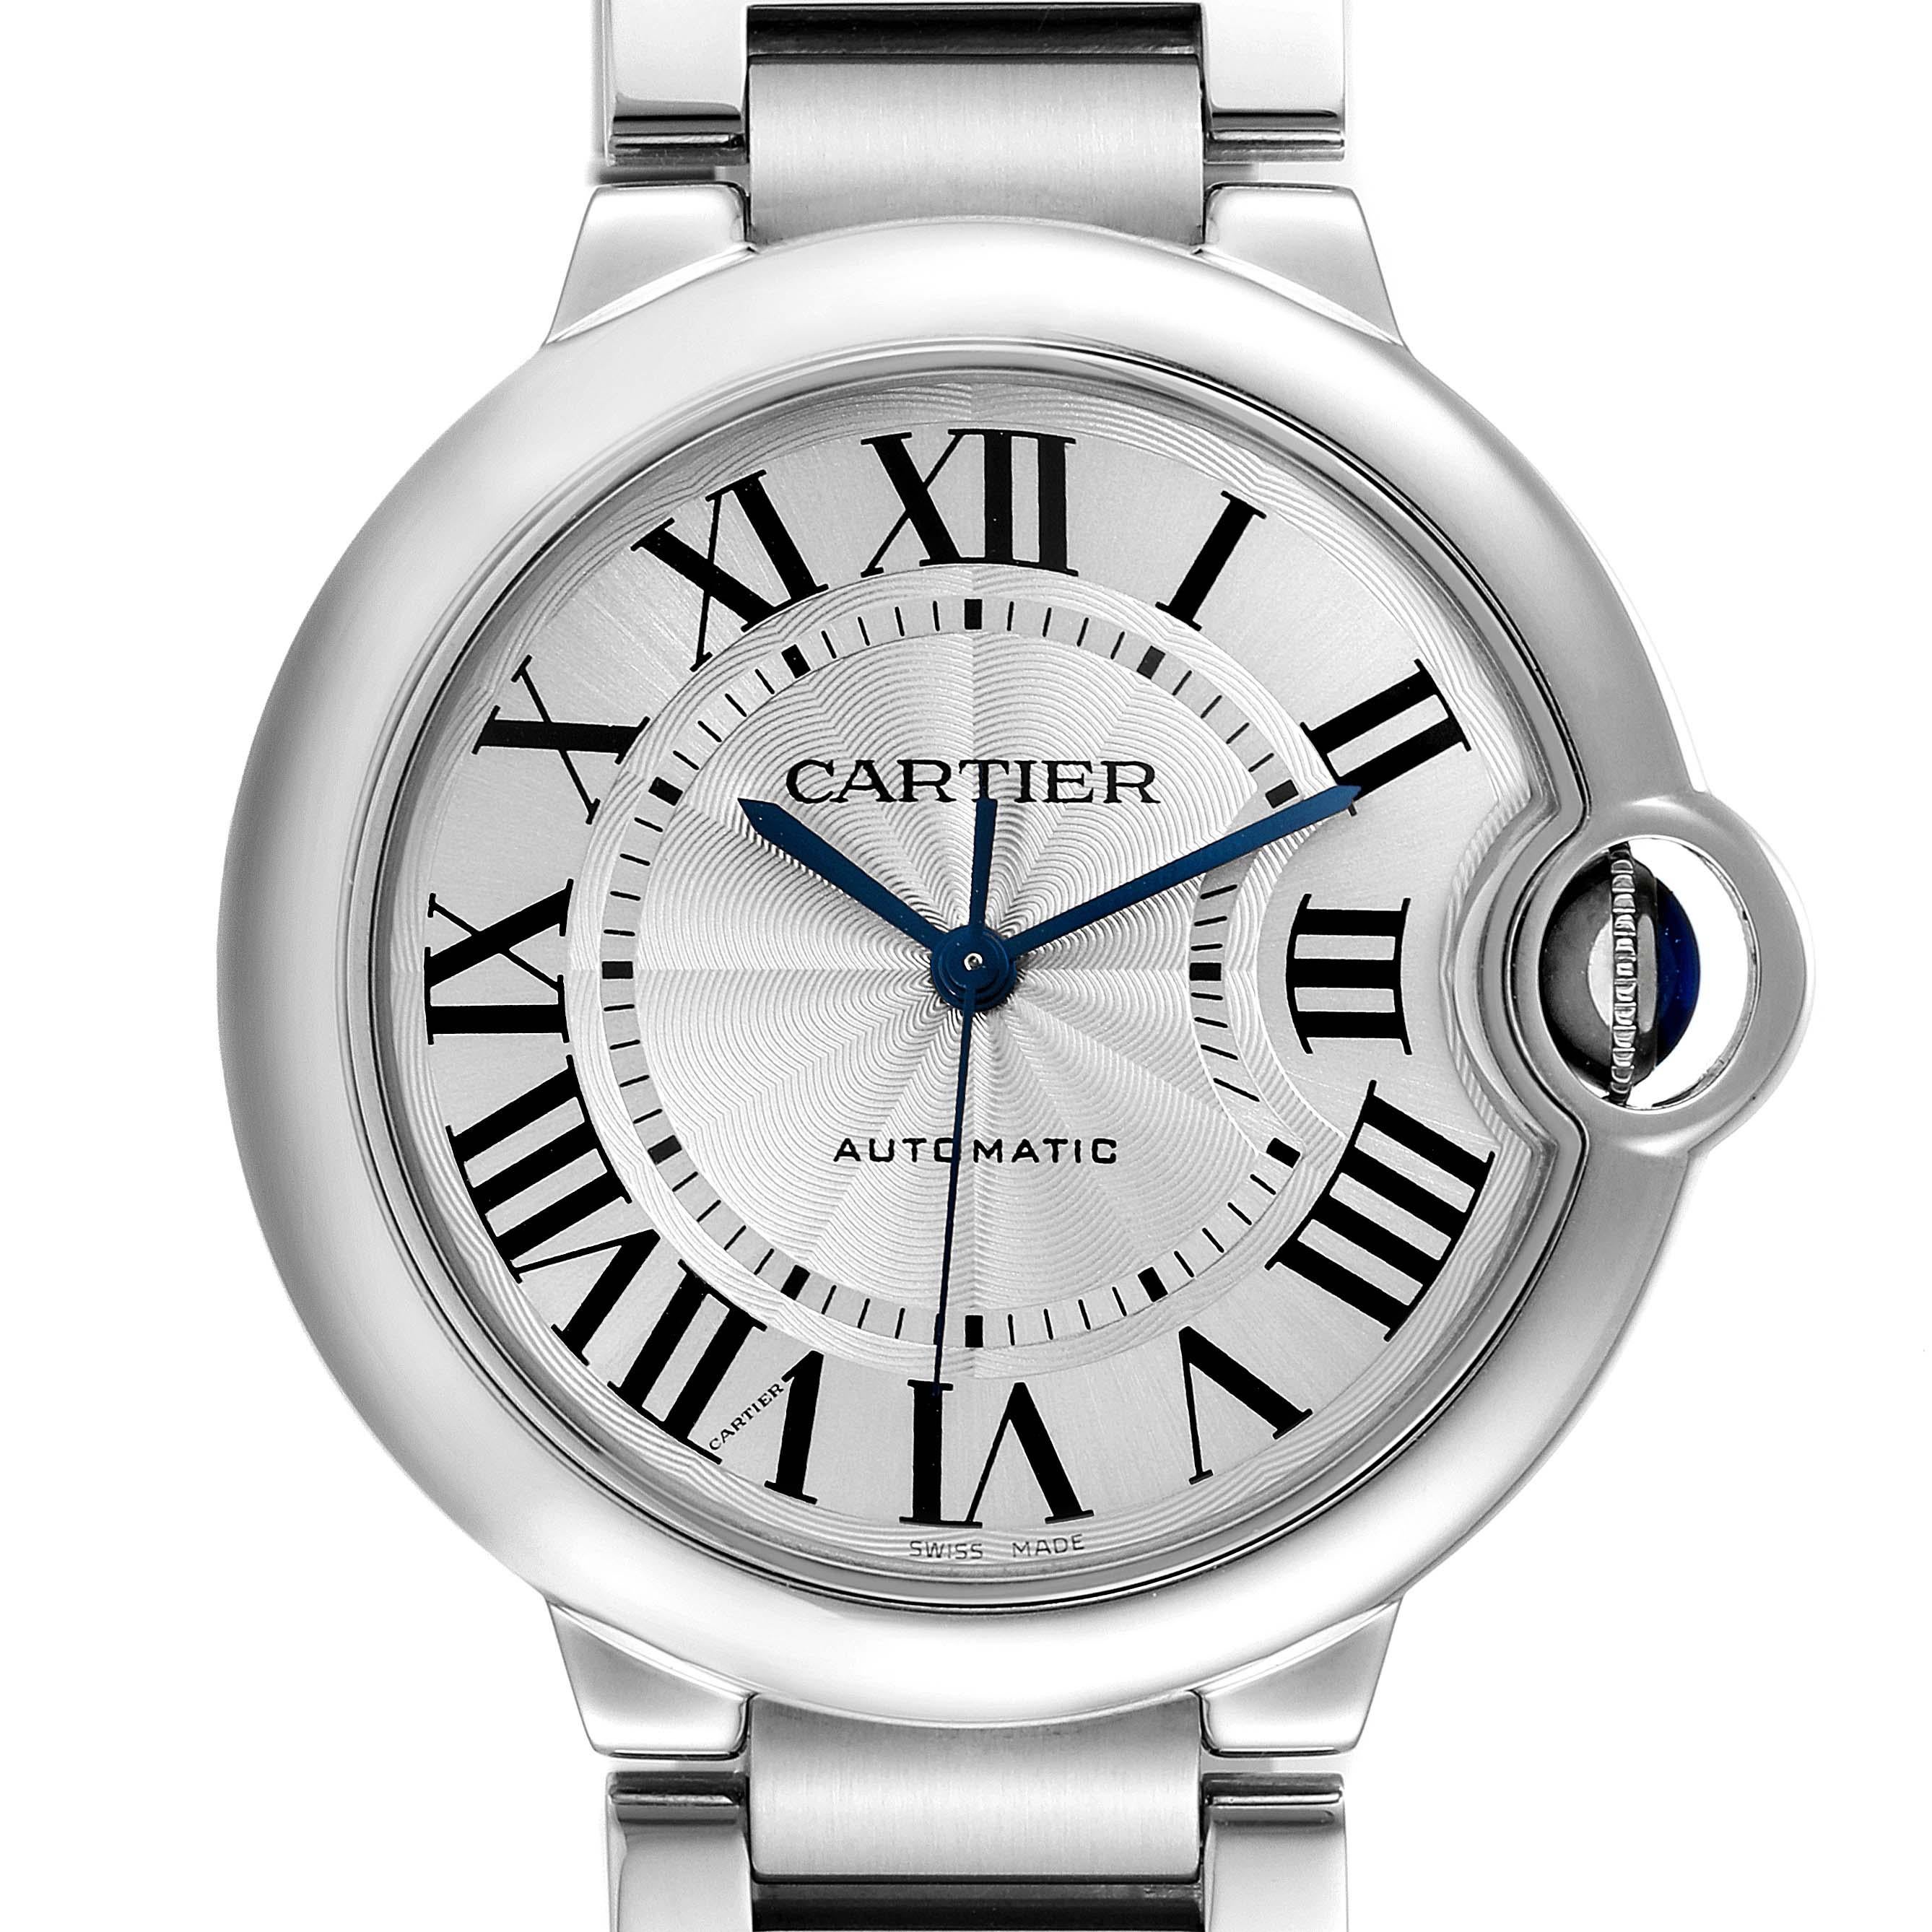 Cartier Ballon Bleu Midsize 36 Silver Dial Steel Ladies Watch W6920046. Automatic self-winding movement. Caliber 076. Stainless steel case 36.6 mm in diameter. Fluted crown set with the blue spinel cabochon. Stainless steel smooth bezel. Scratch